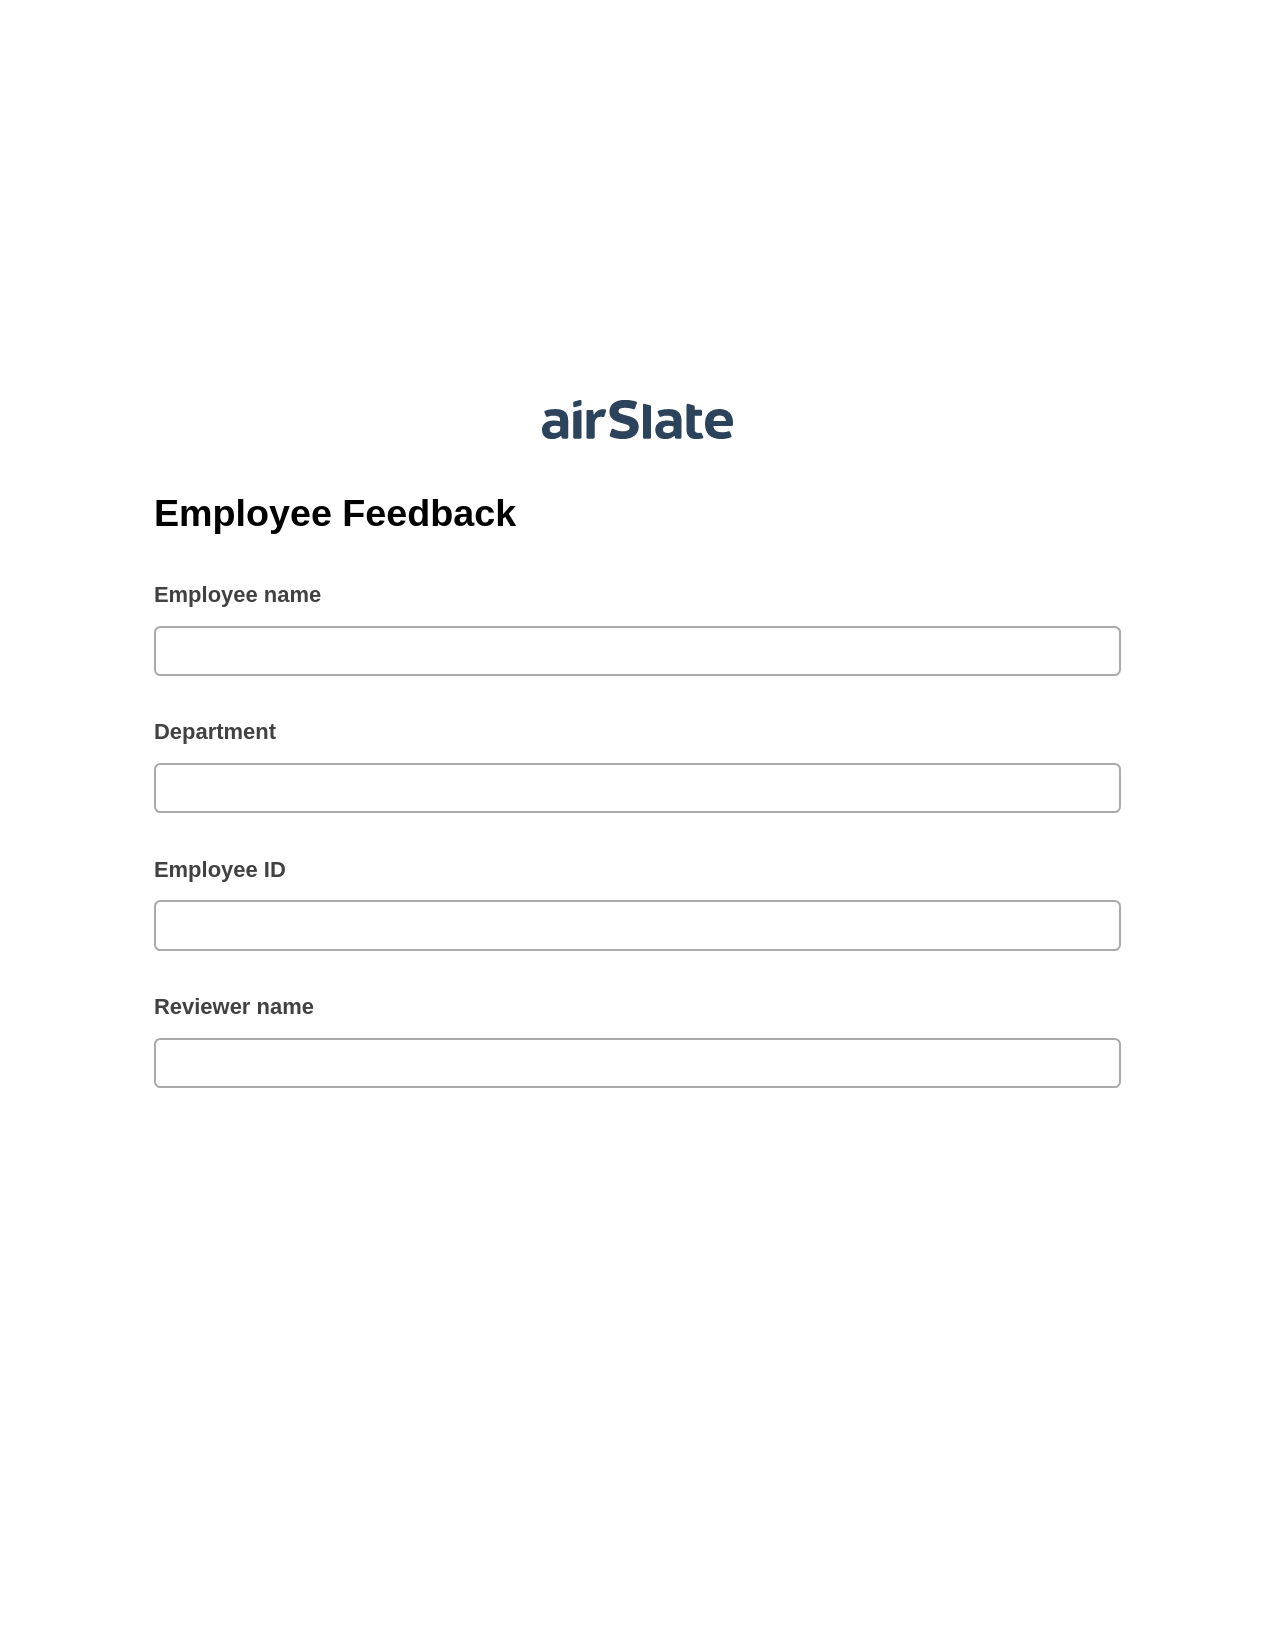 Employee Feedback Pre-fill Slate from MS Dynamics 365 Records Bot, Roles Reminder Bot, Box Bot